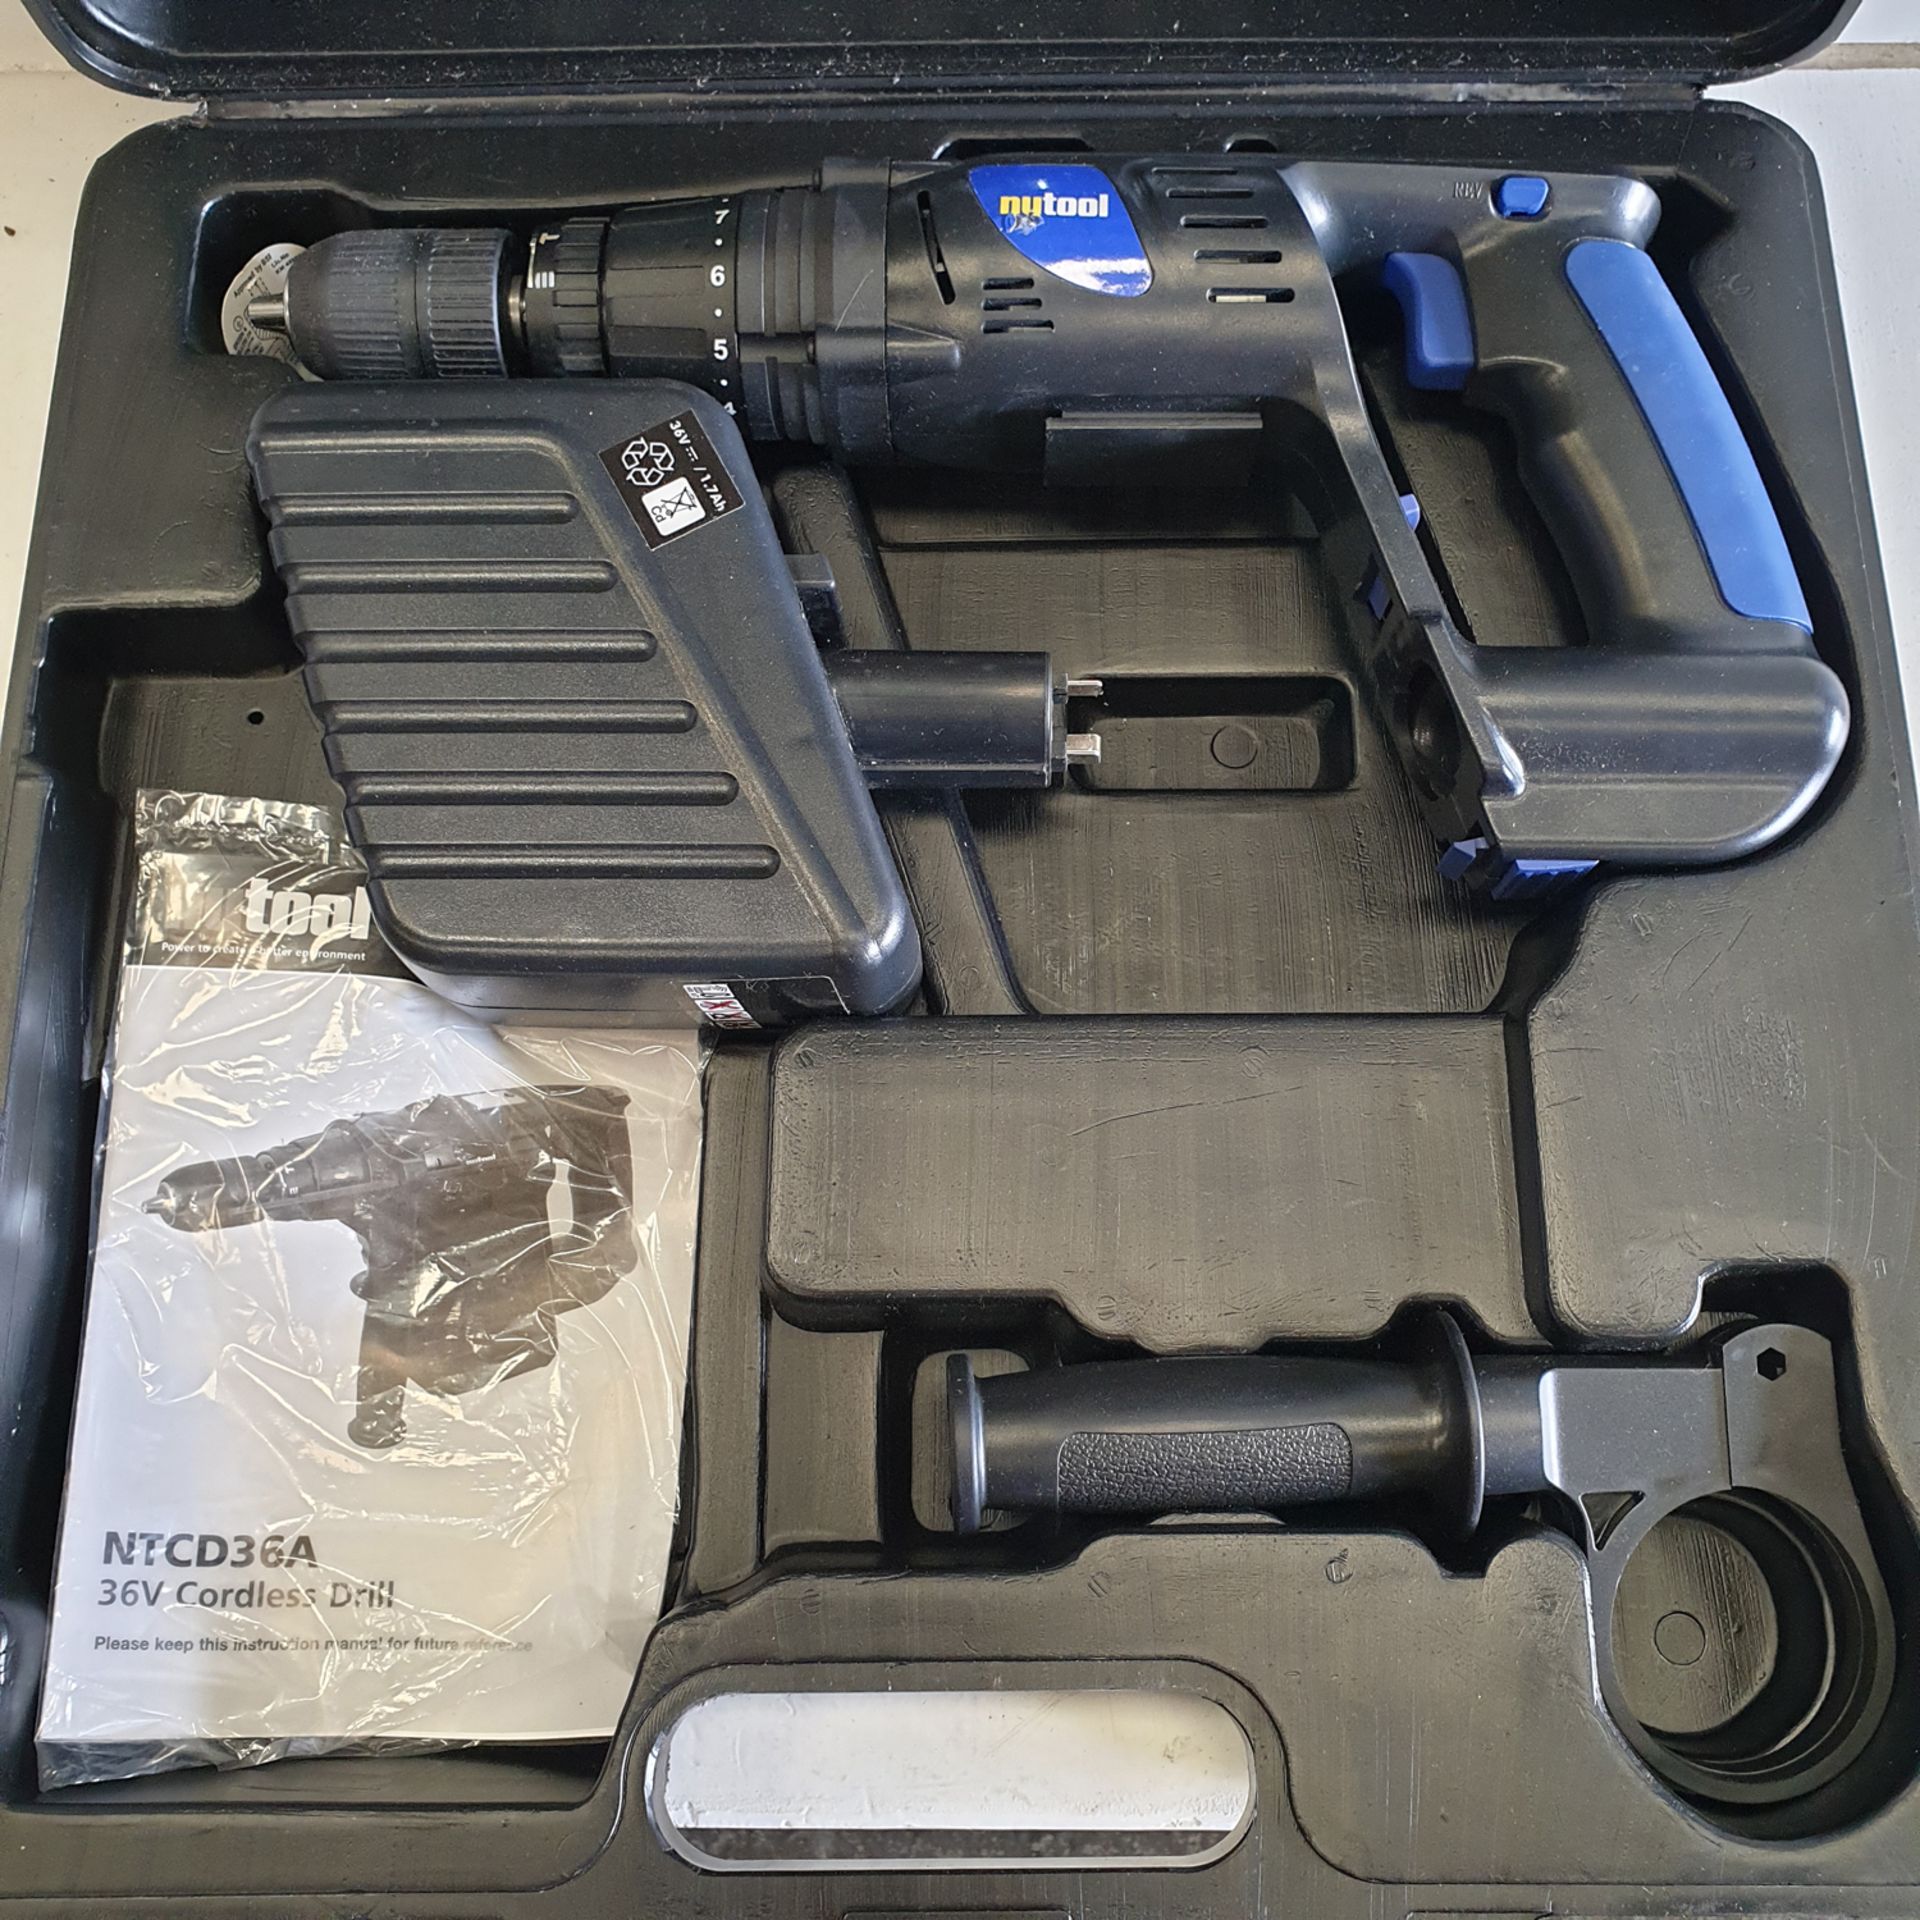 nutool Model NTCD36A 36V Cordless Drill. With Battery & Drill Bits. In Box. - Image 2 of 6